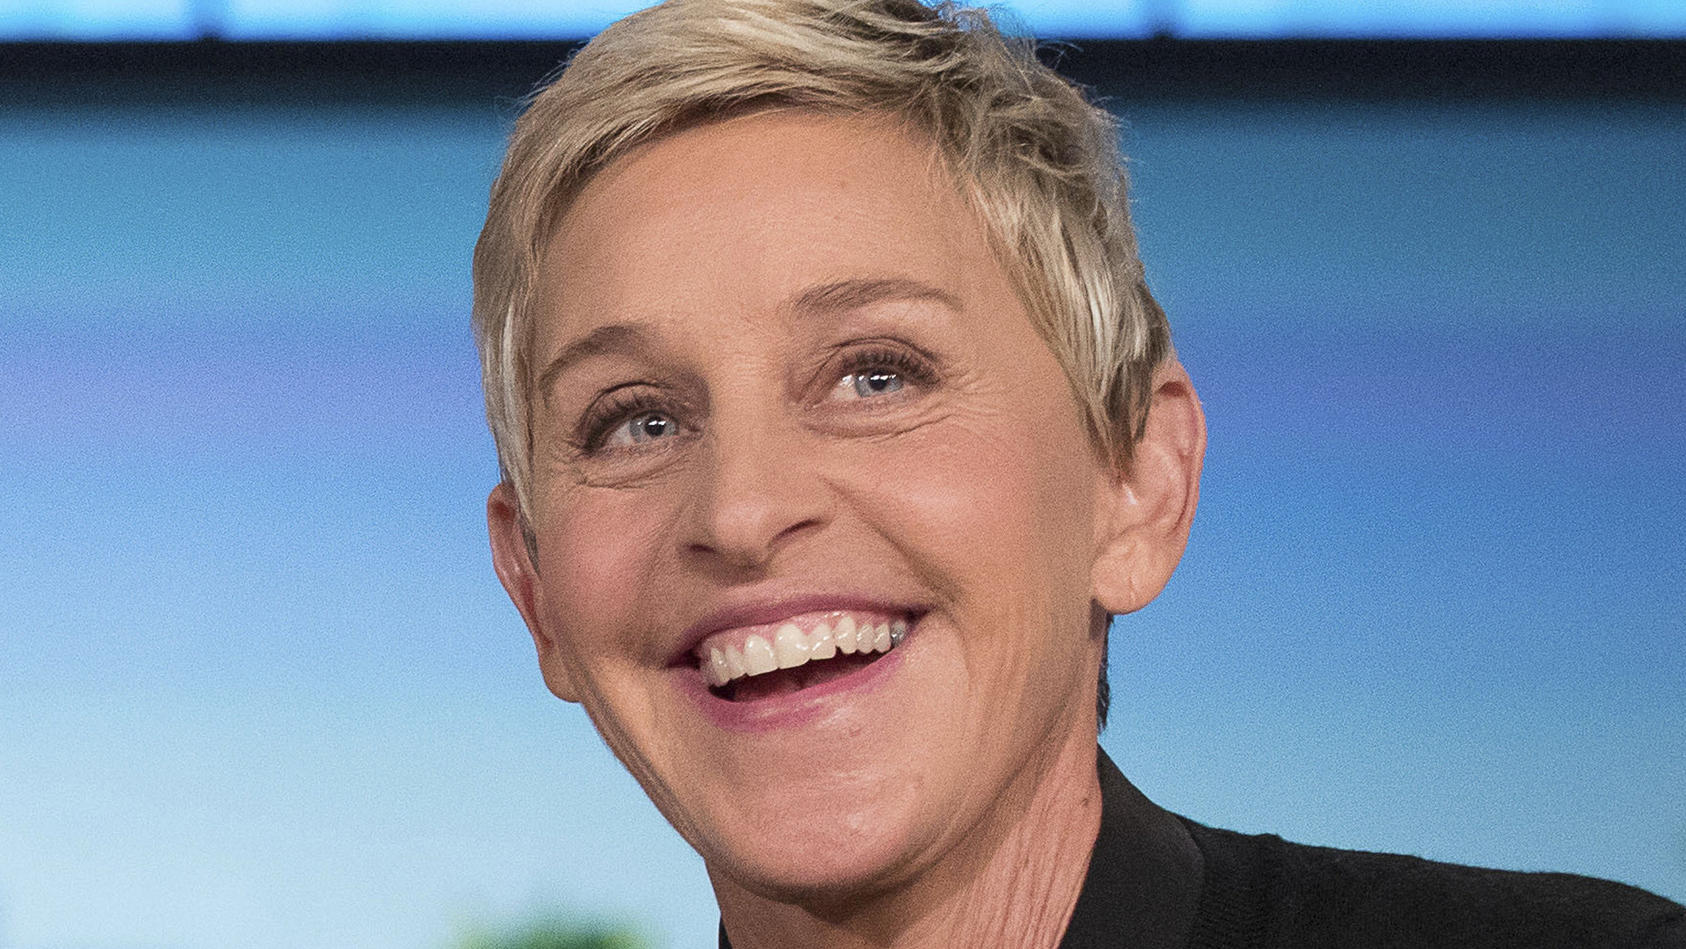 FILE - In this Oct. 13, 2016, file photo, Ellen DeGeneres appears during a commercial break at a taping of "The Ellen Show" in Burbank, Calif.  The program won outstanding entertainment talk show at the 47th annual Daytime Emmy Awards. (AP Photo/Andr